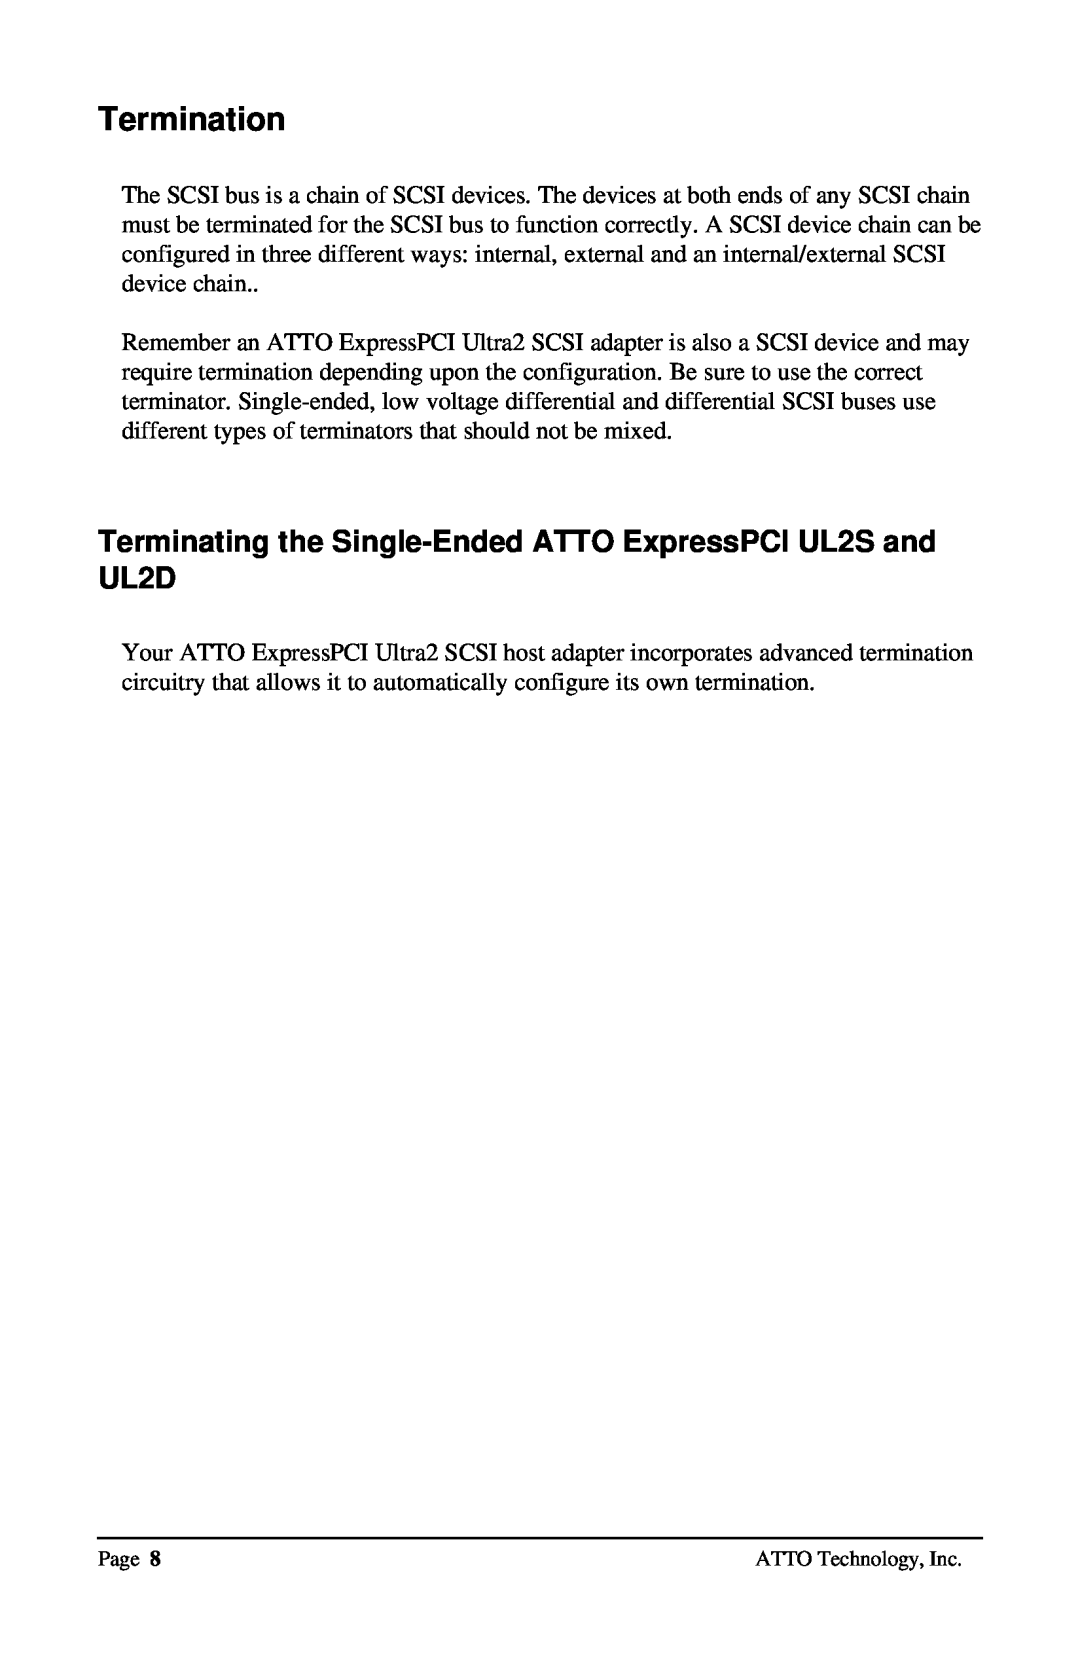 ATTO Technology UL25 user manual Termination, Terminating the Single-Ended ATTO ExpressPCI UL2S and UL2D 